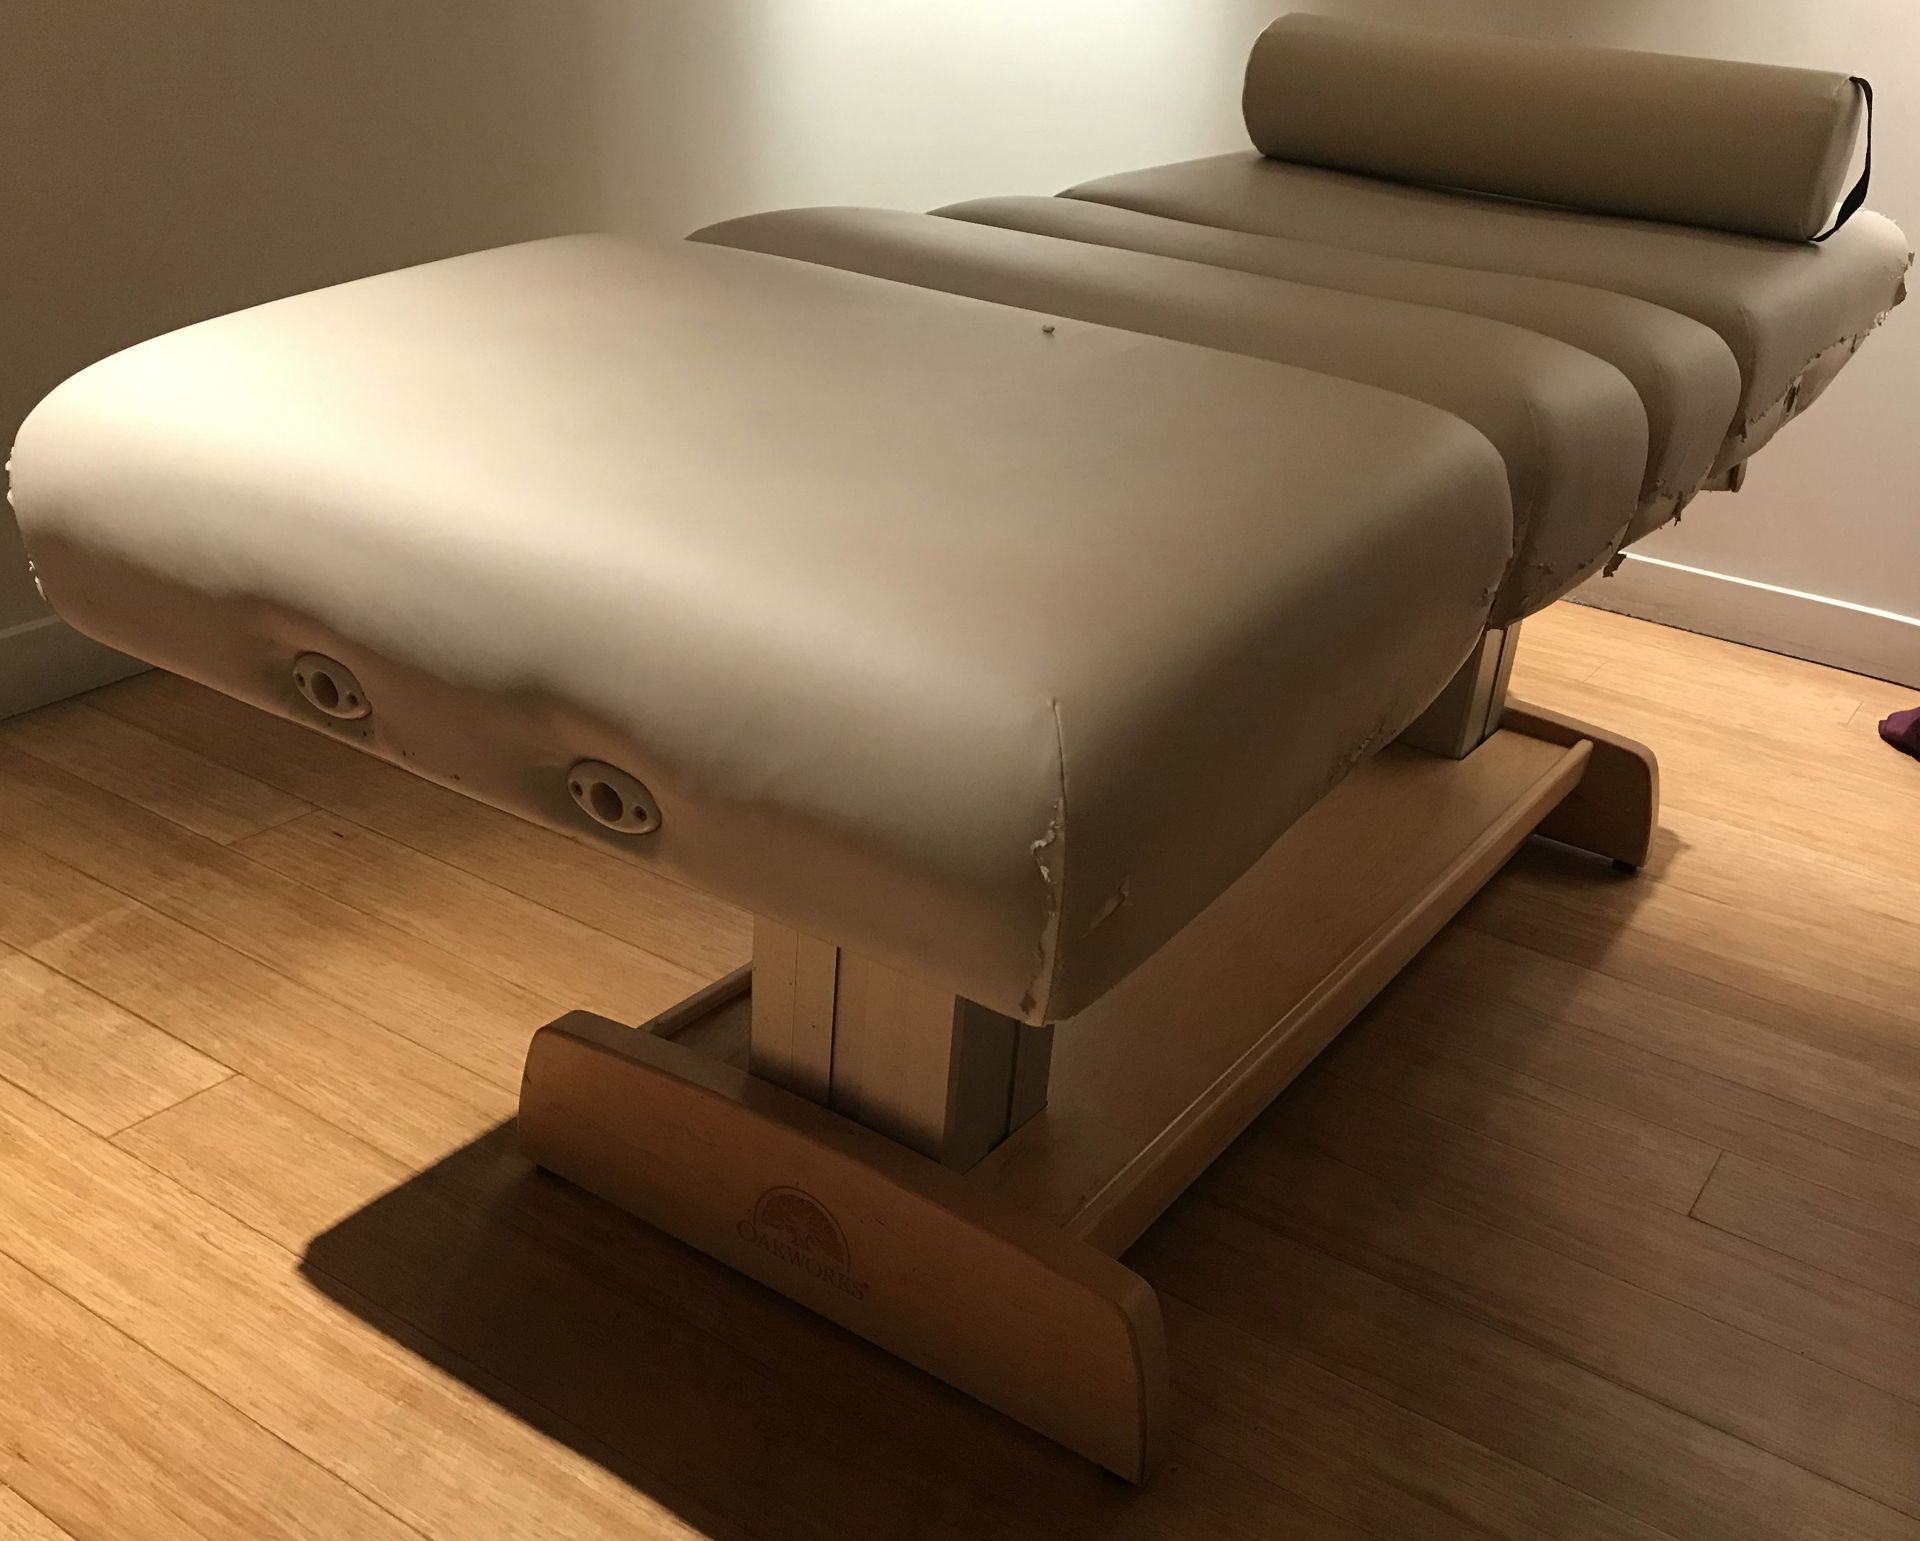 1 x Oakworks Clinician Electric-Hydraulic Massage Table With Footpedal and Linak HBWO Remote Control - Image 6 of 11